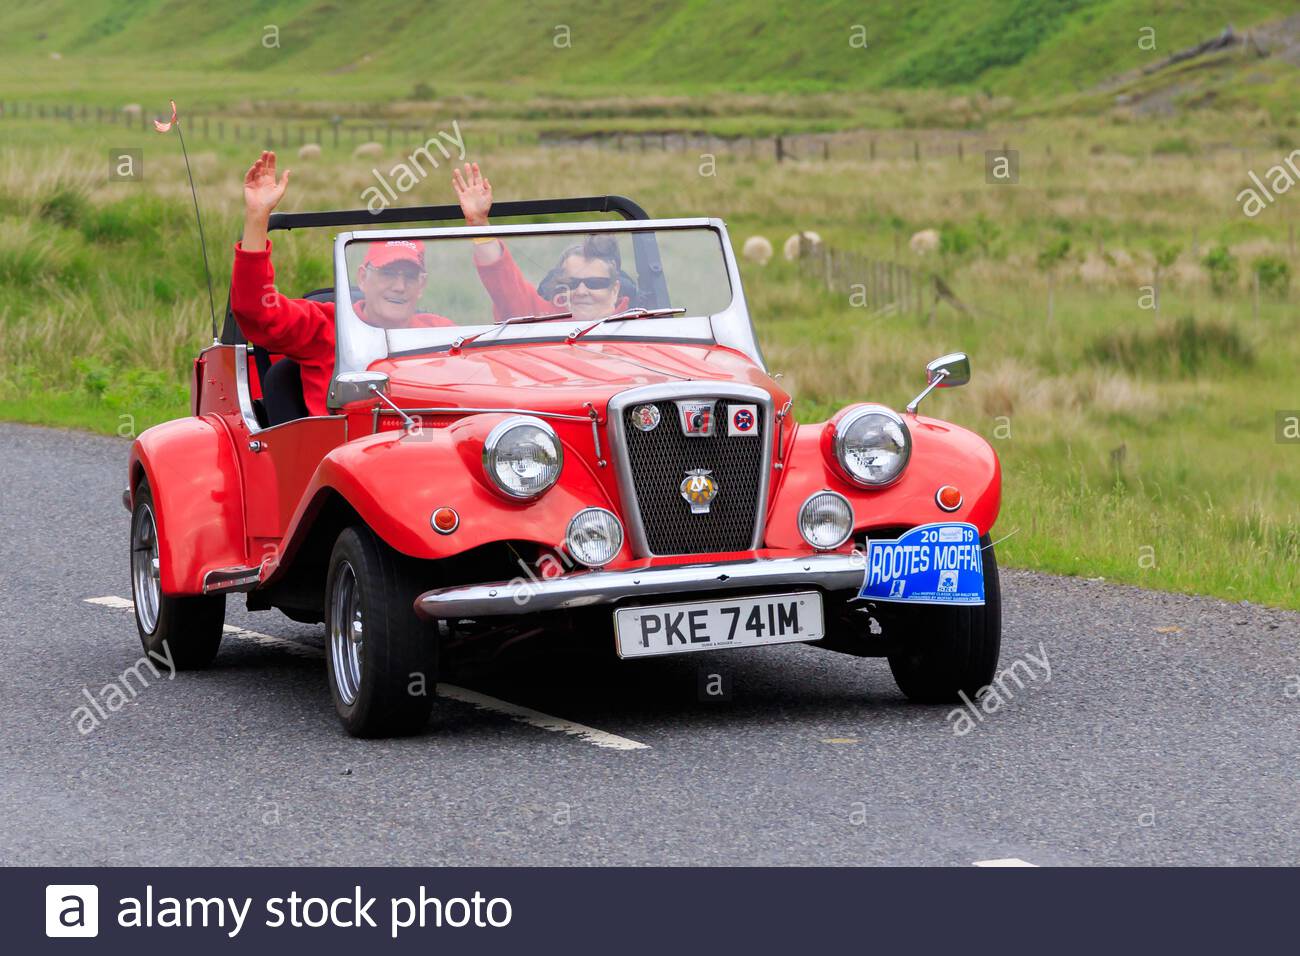 moffat-scotland-june-29-2019-spartan-roadster-kit-car-in-a-classic-car-rally-en-route-towards-the-town-of-moffat-dumfries-and-galloway-2BXTWCD.jpg